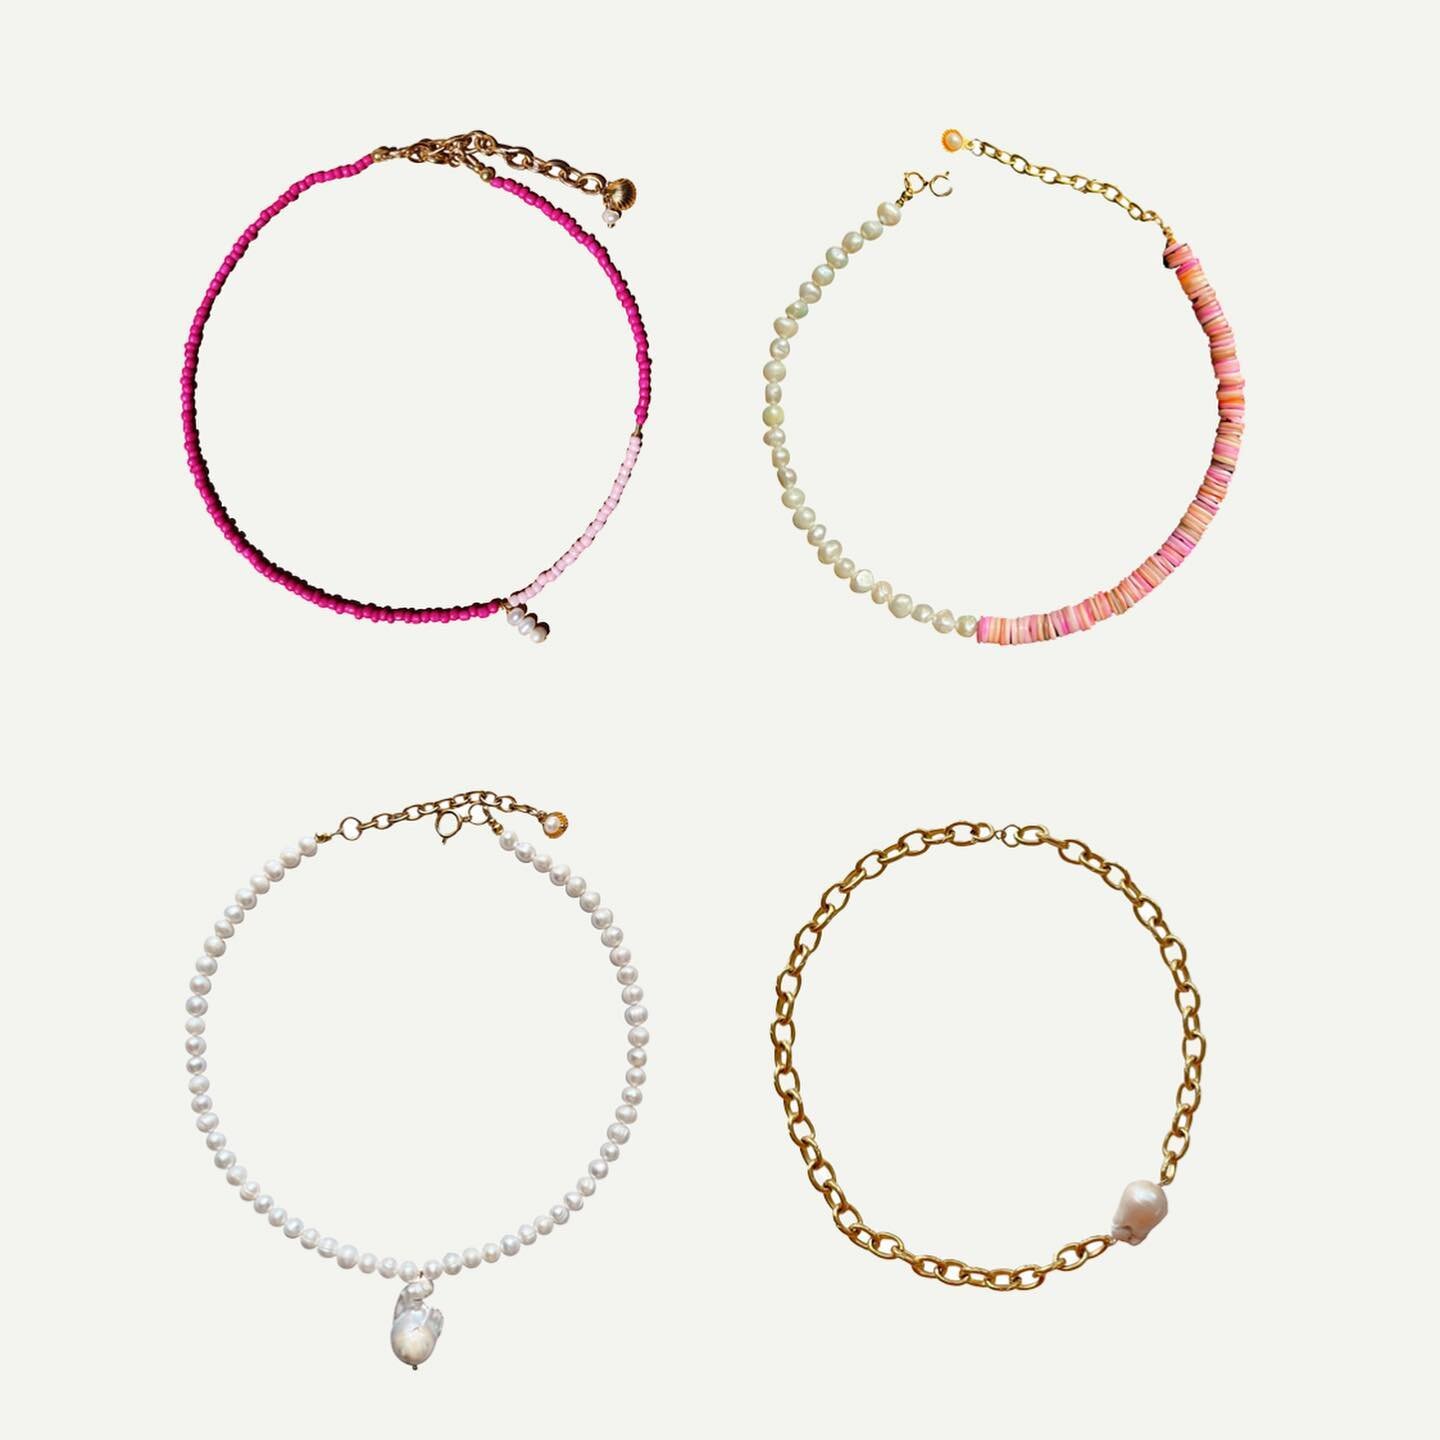 A few of our favourite necklaces💖 which is your favourite?🌞